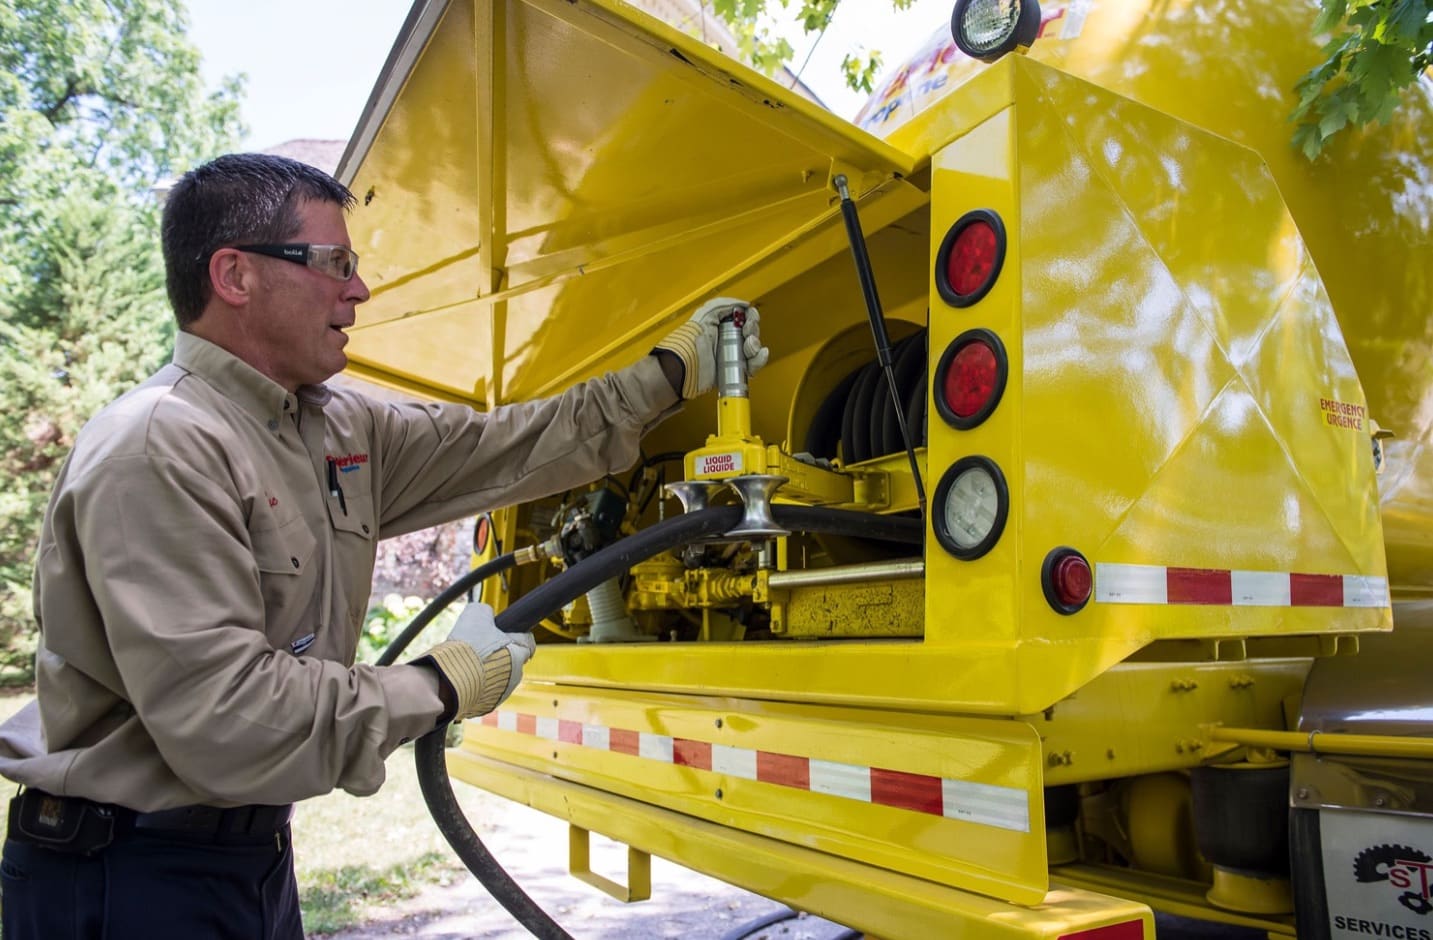 A Superior Propane employee preparing the hose from the truck to start refilling a tank.